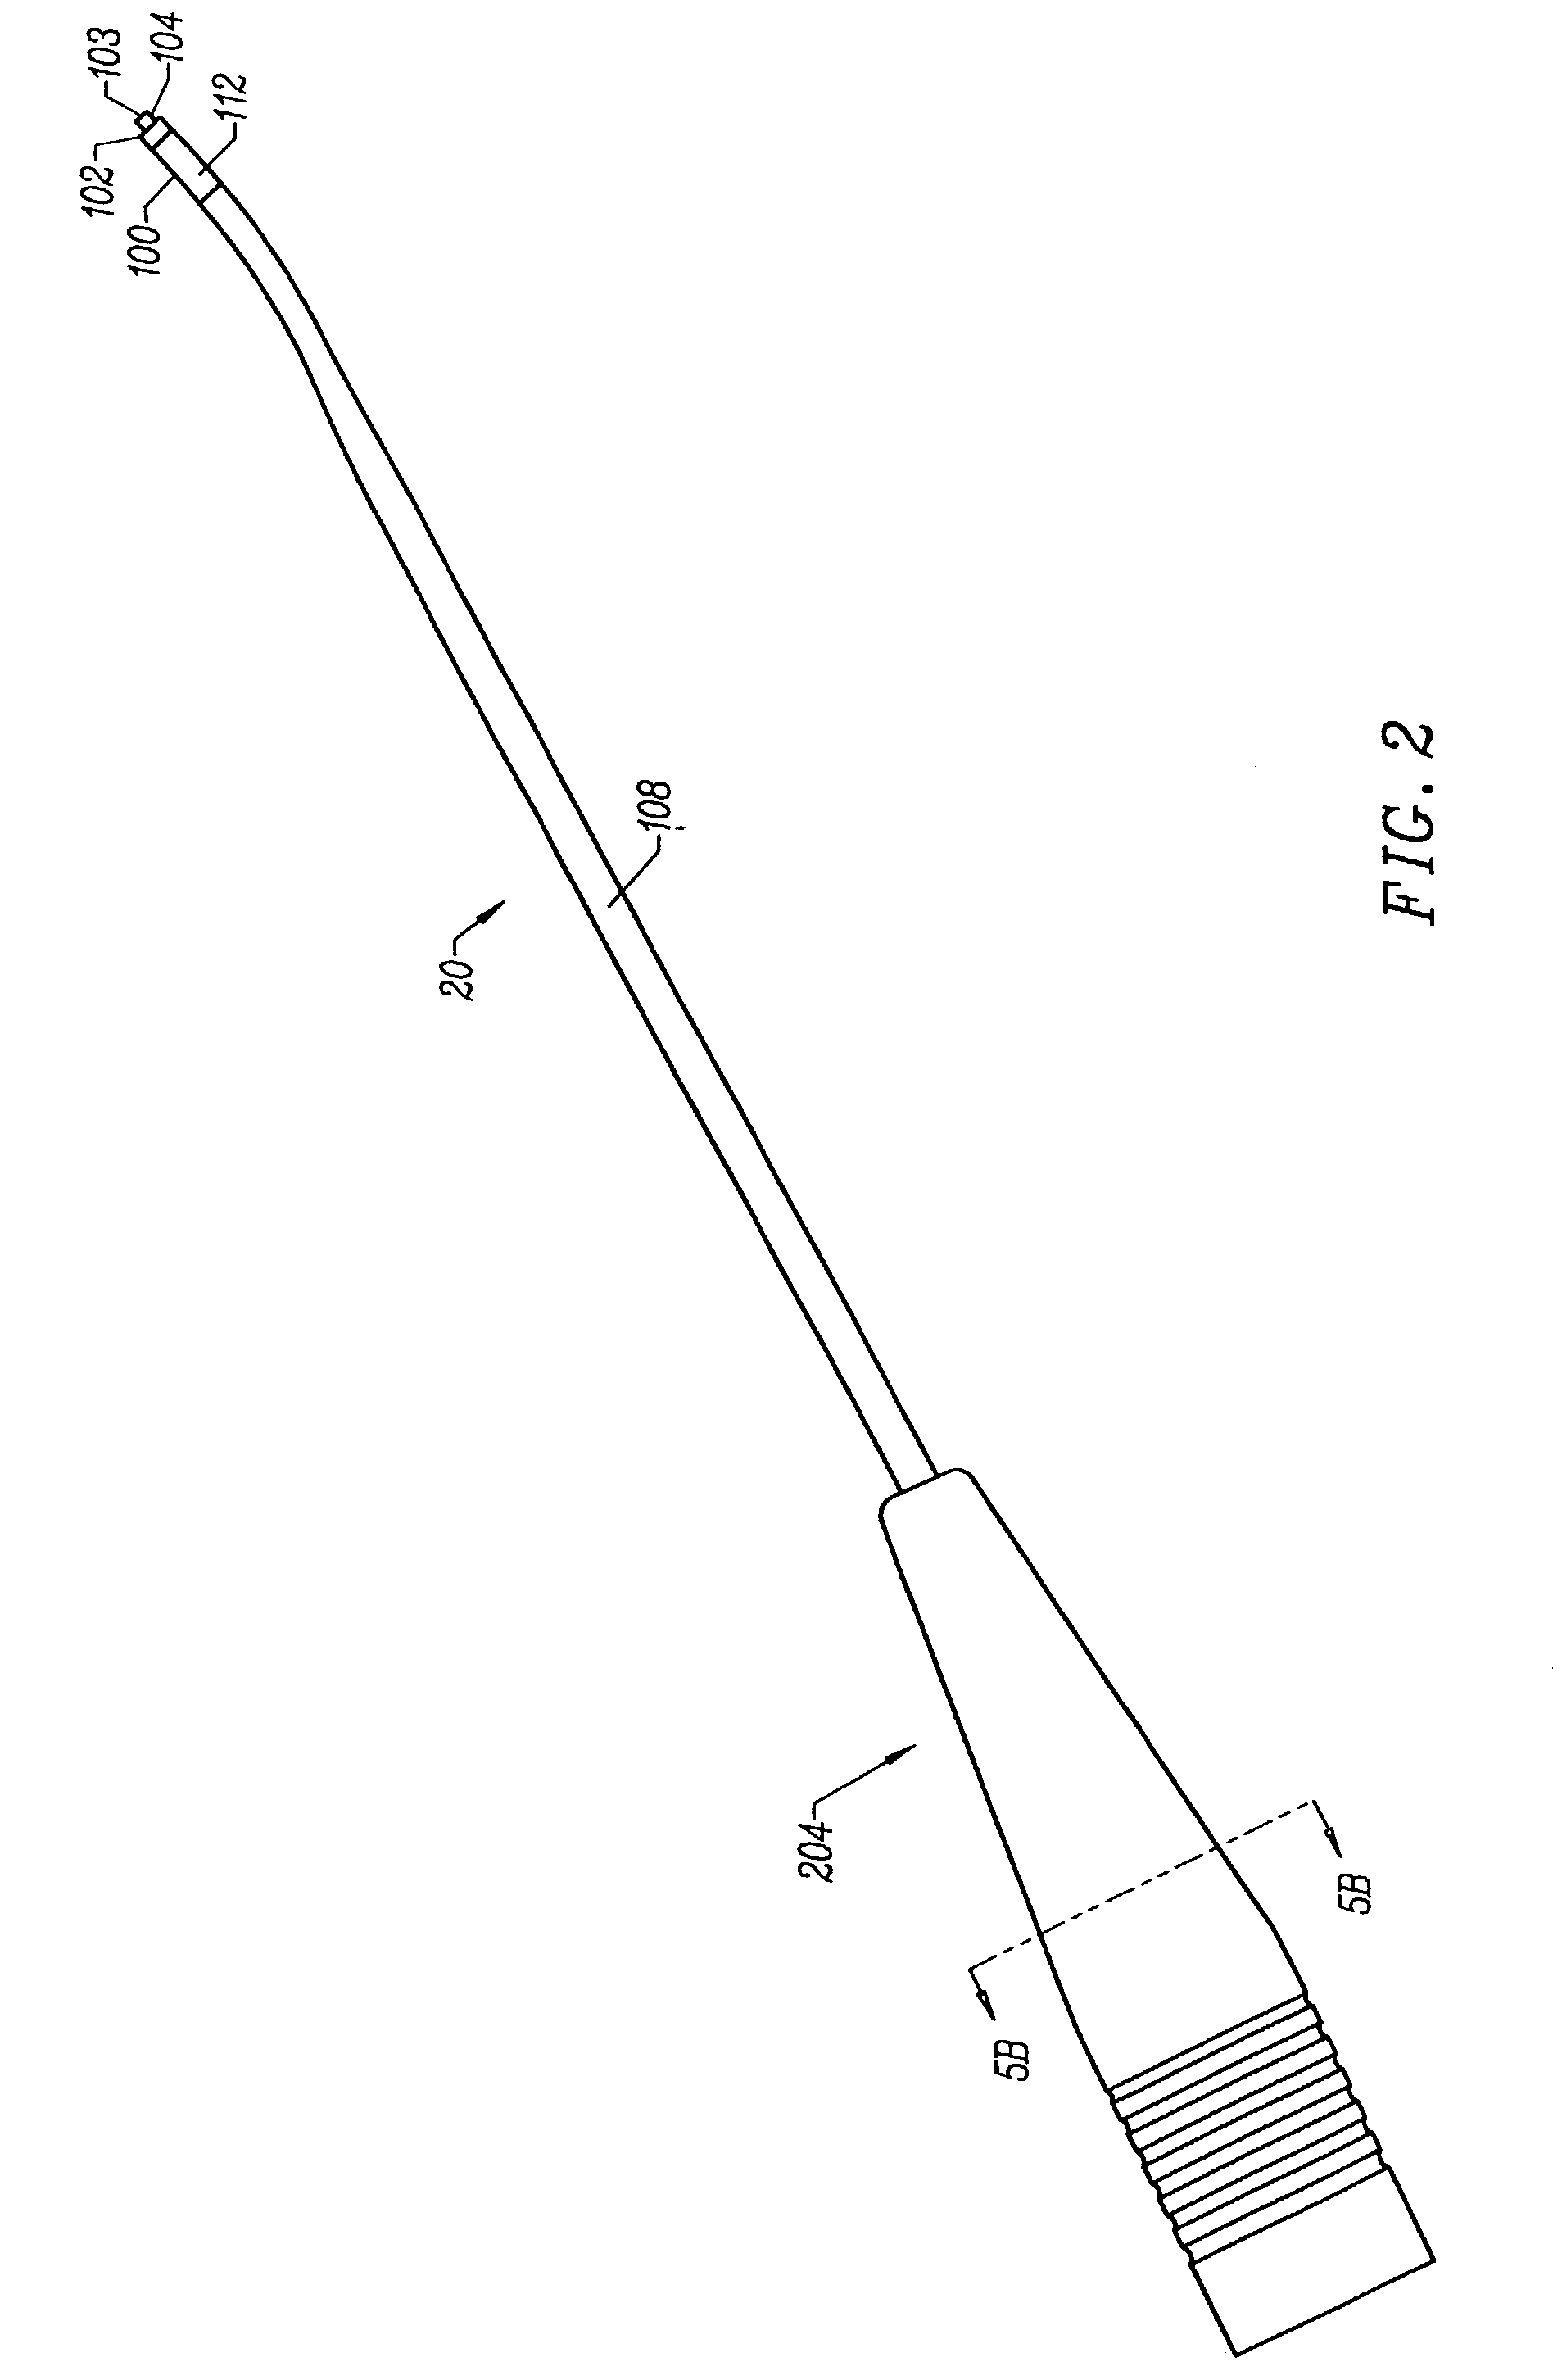 Electrosurgical probe having circular electrode array for ablating joint tissue and systems related thereto